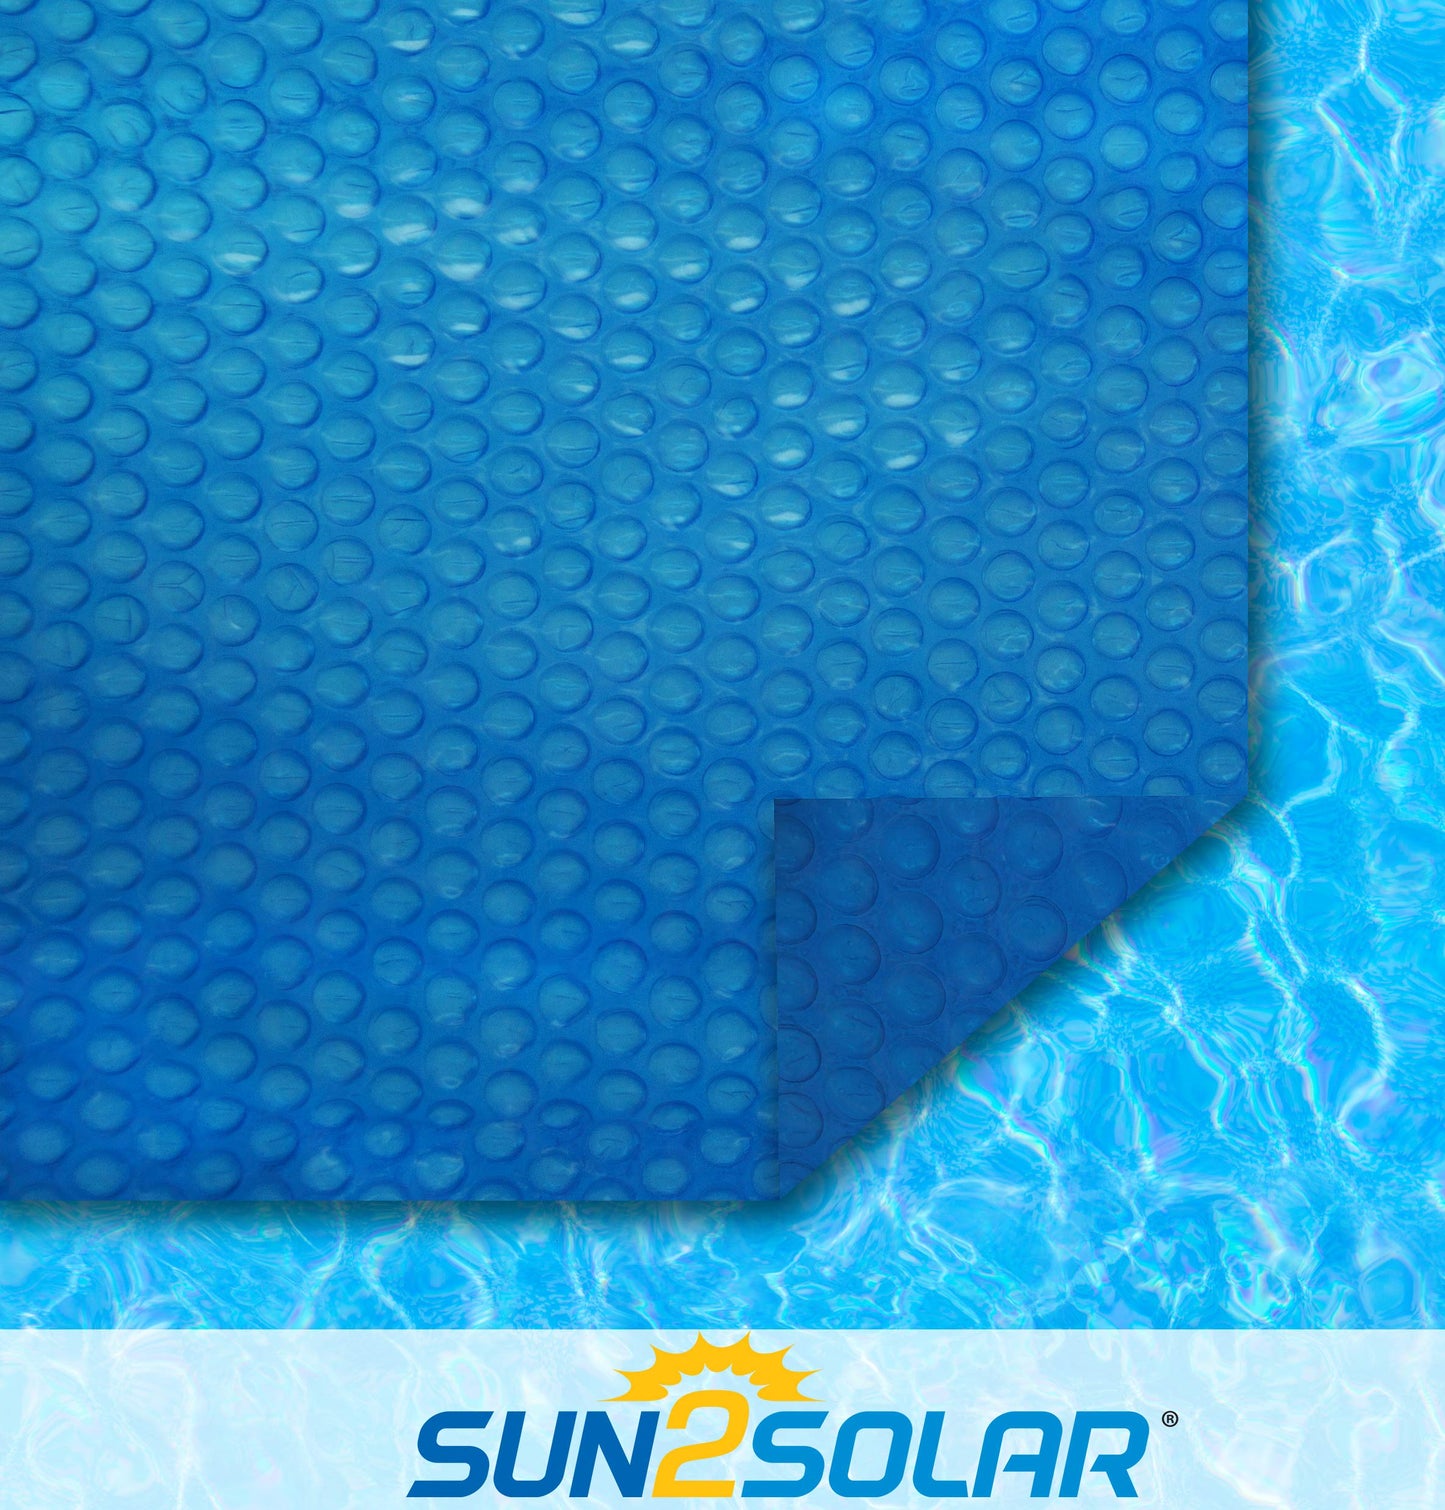 Sun2Solar Blue 15-Foot-by-30-Foot Oval Solar Cover | 1200 Series | Heat Retaining Blanket for In-Ground and Above-Ground Oval Swimming Pools | Use Sun to Heat Pool Water | Bubble-Side Facing Down 15' x 30' Oval